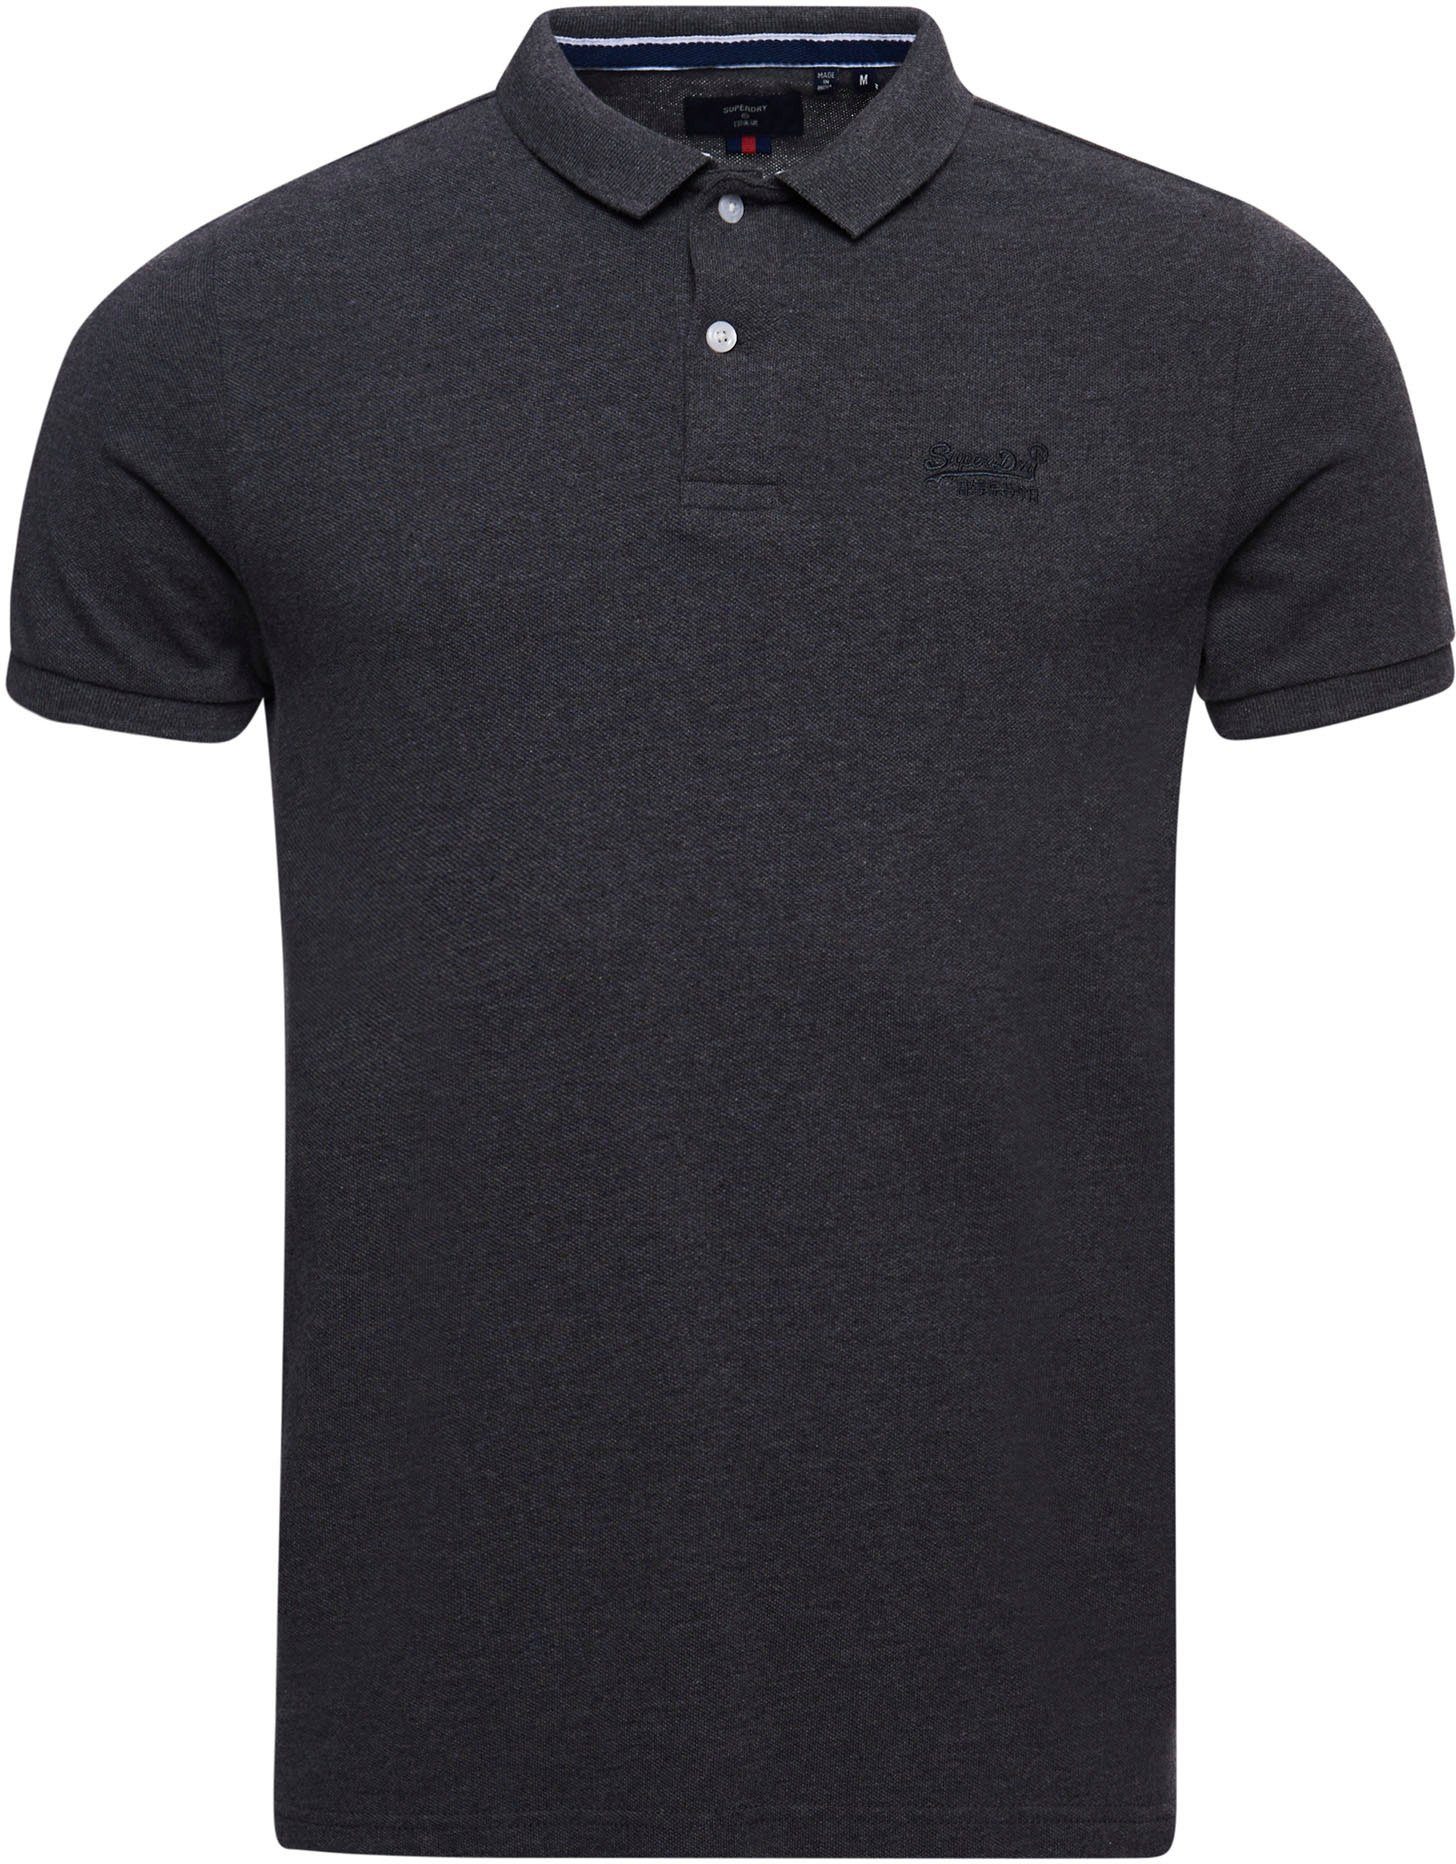 POLO Poloshirt marl CLASSIC rich Superdry charcoal PIQUE